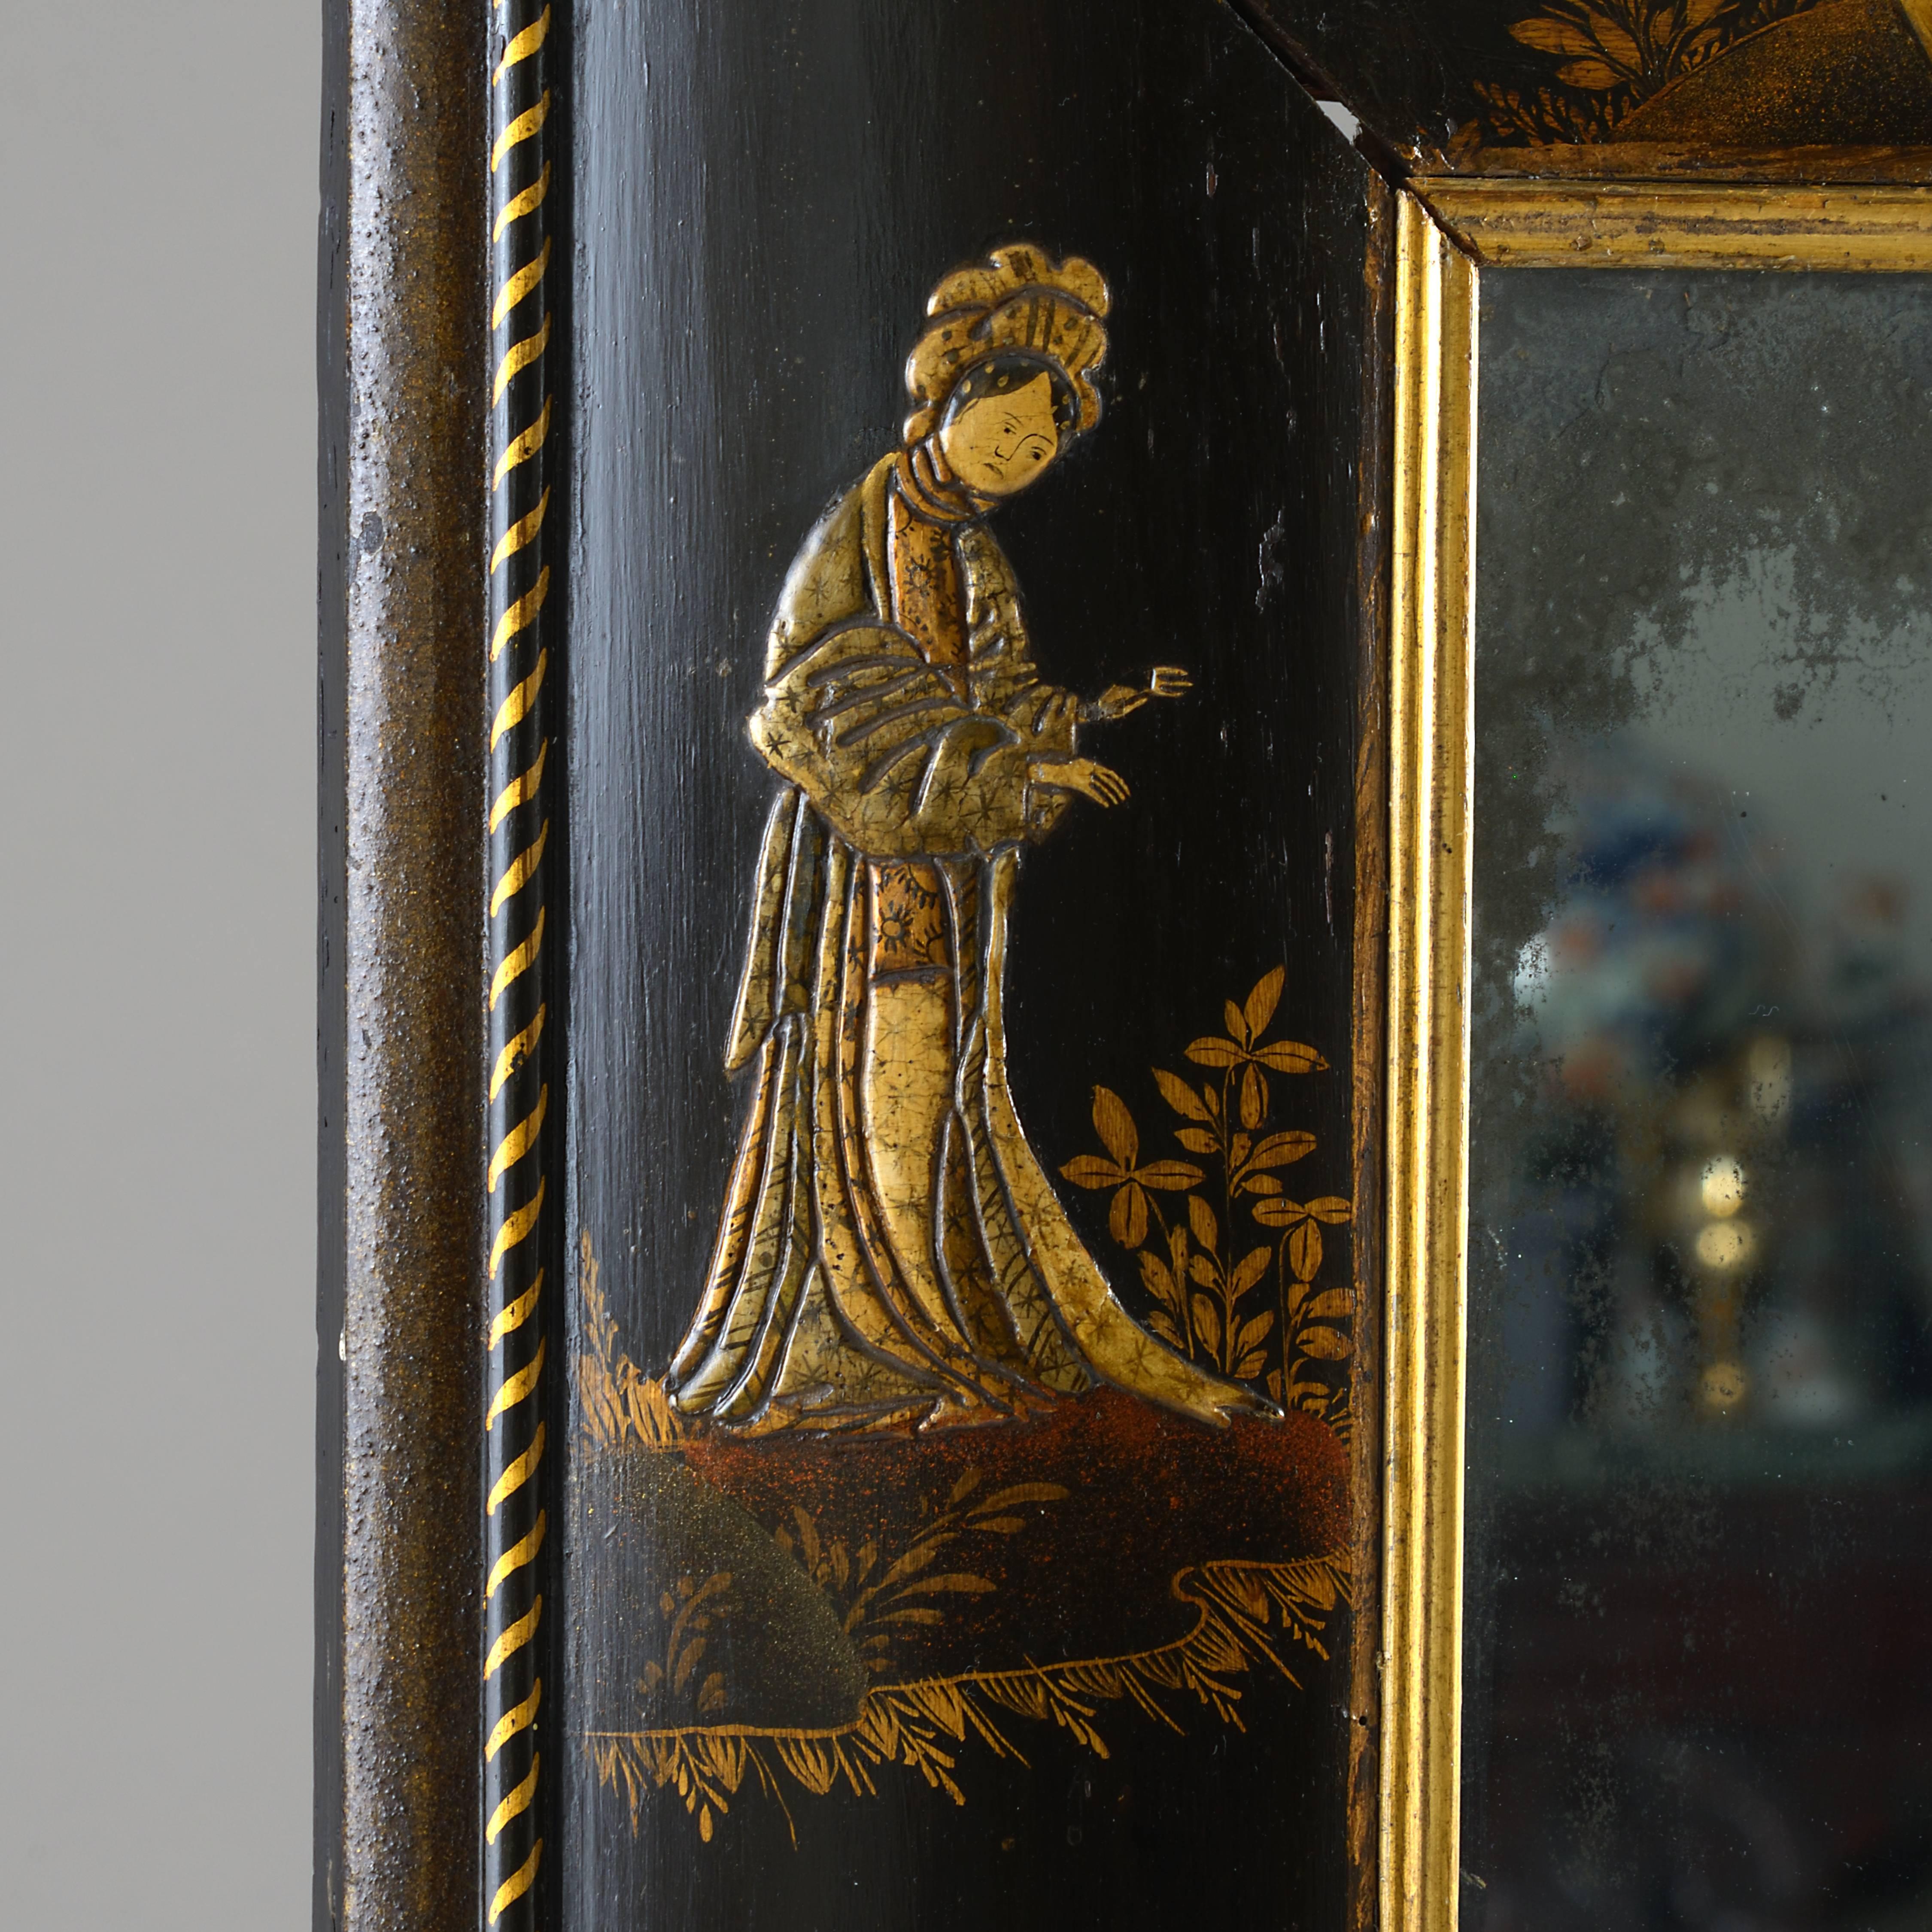 A Fine William and Mary japanned and gilt mirror, circa 1690.
The bolection frame decorated in relief with Chinese figures, flowers, buildings and a pheasant. 
Labelled BRYNKINALT.

Provenance:
By descent in the Trevor family, Brynkinalt, North